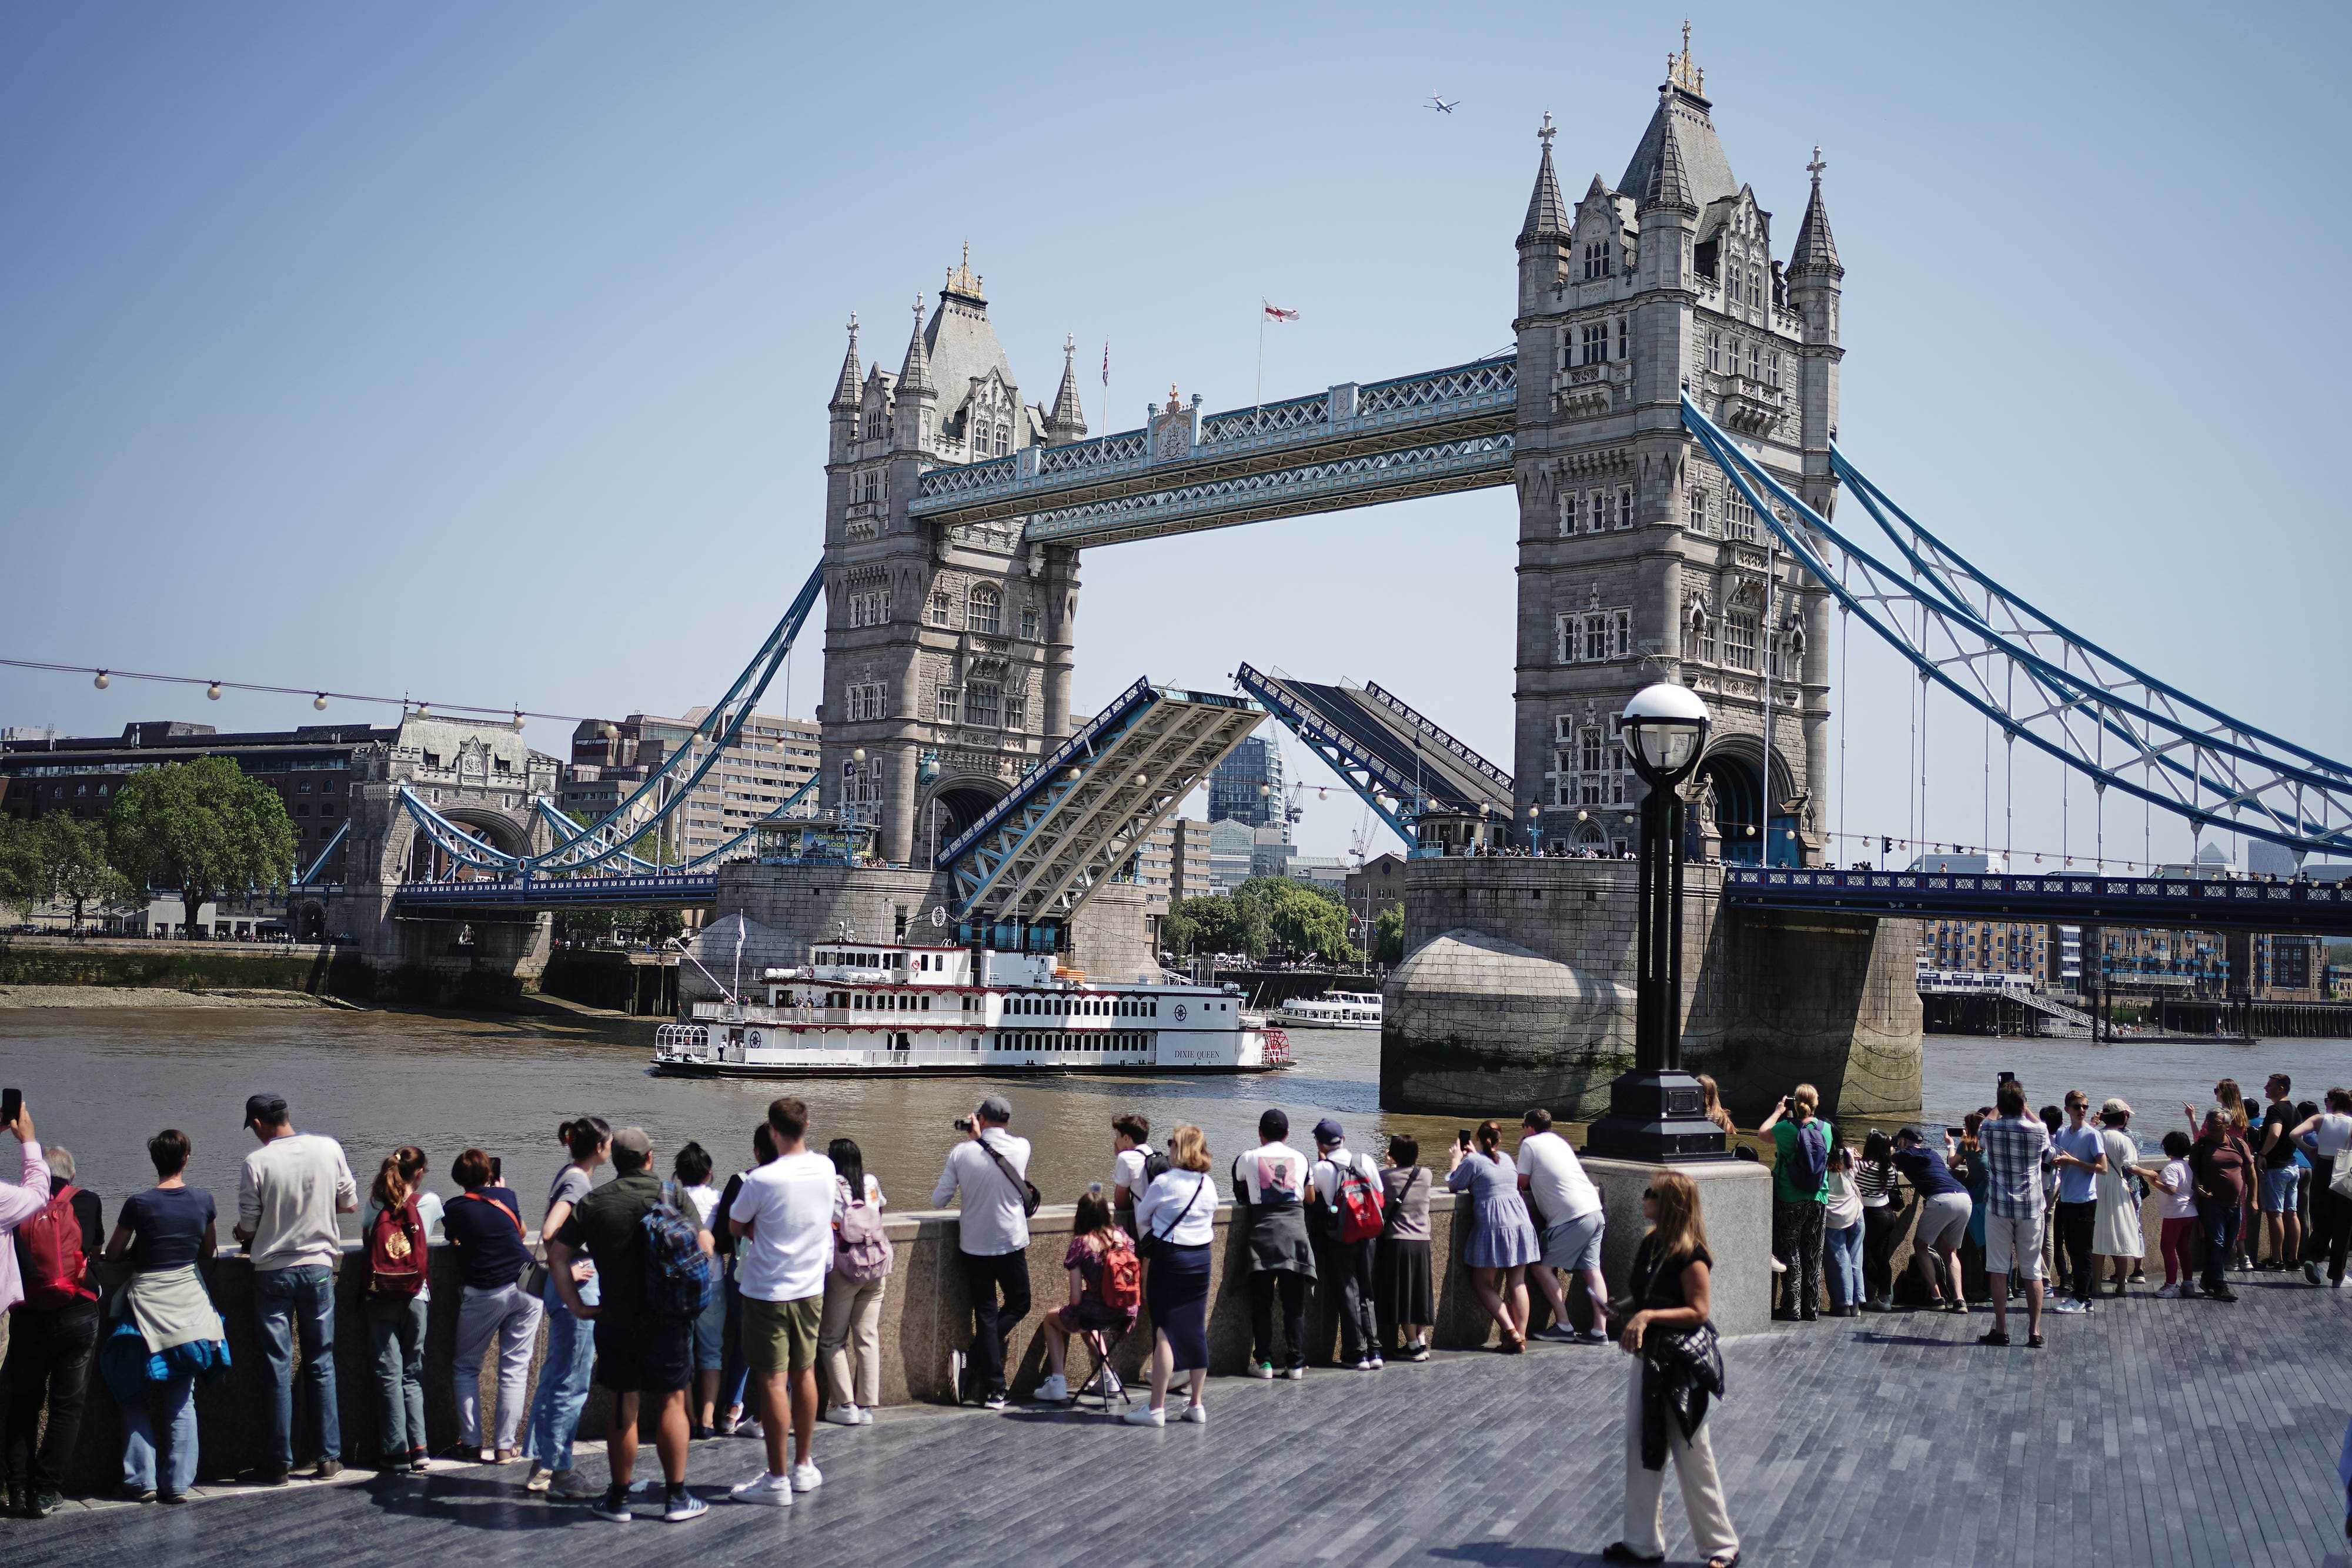 Crowds gather to watch the bridge open at various times in the day